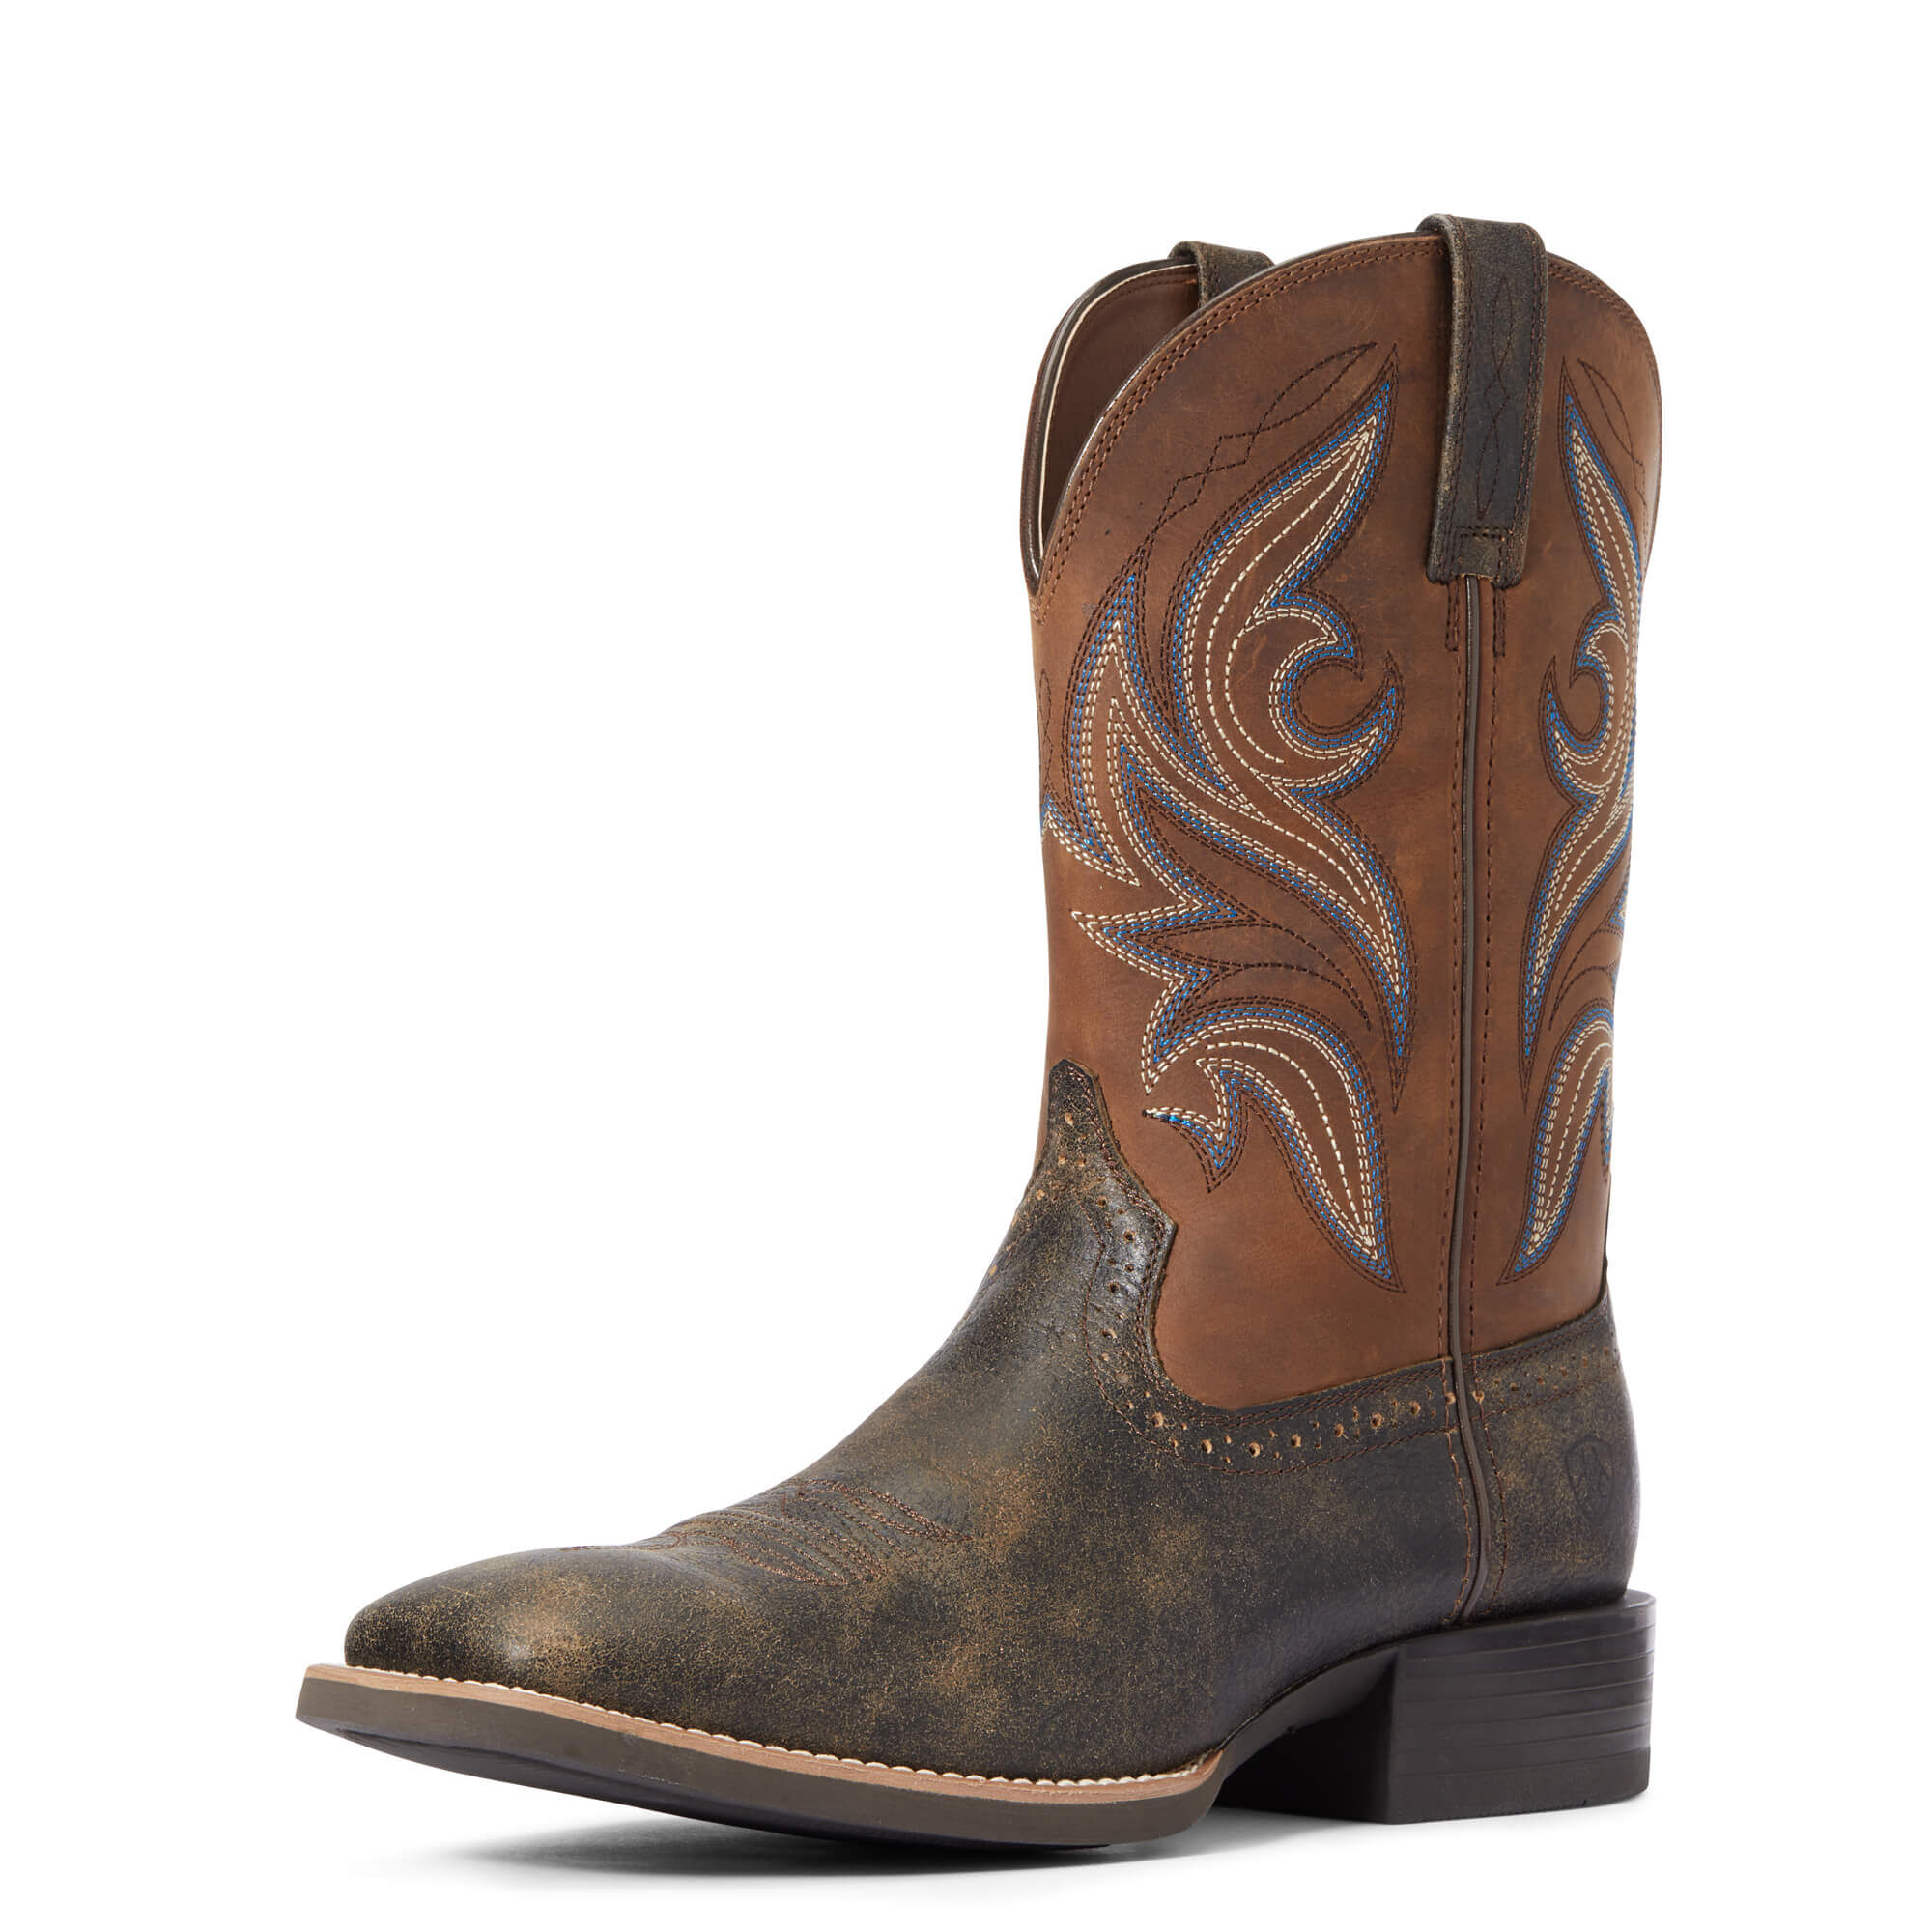 size 16 ee cowboy boots